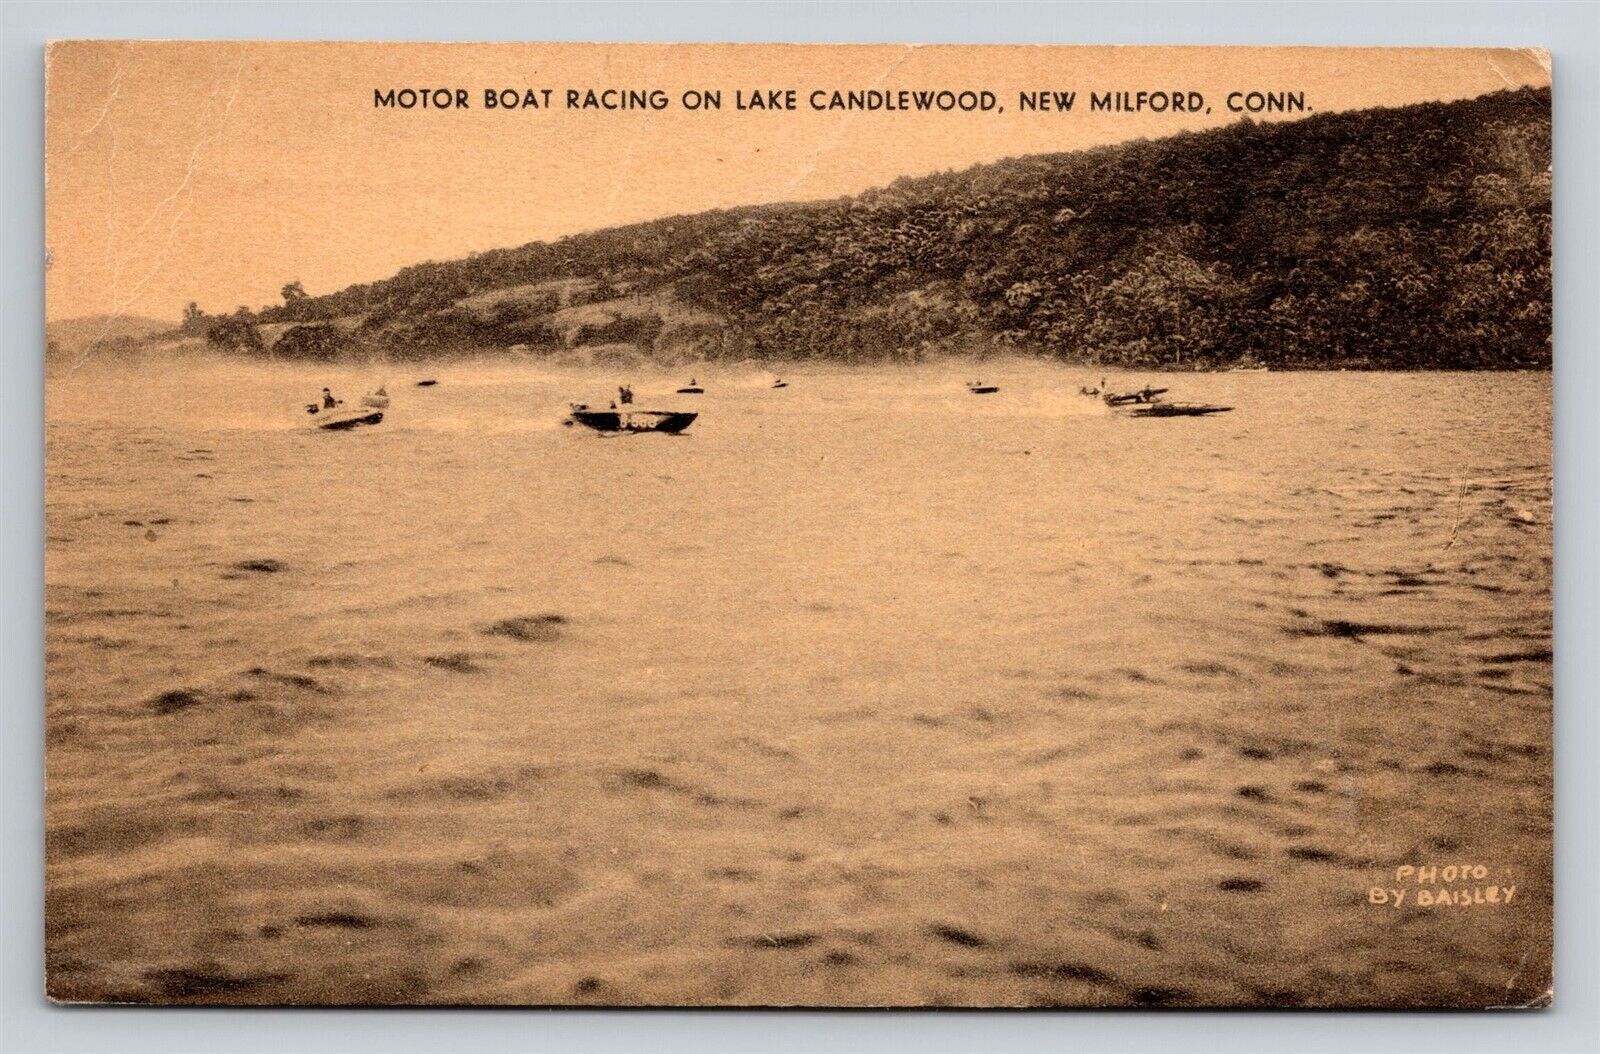 New Milford CT Motor Boat Racing on Lake Candlewood Collotype Old Postcard 1930s